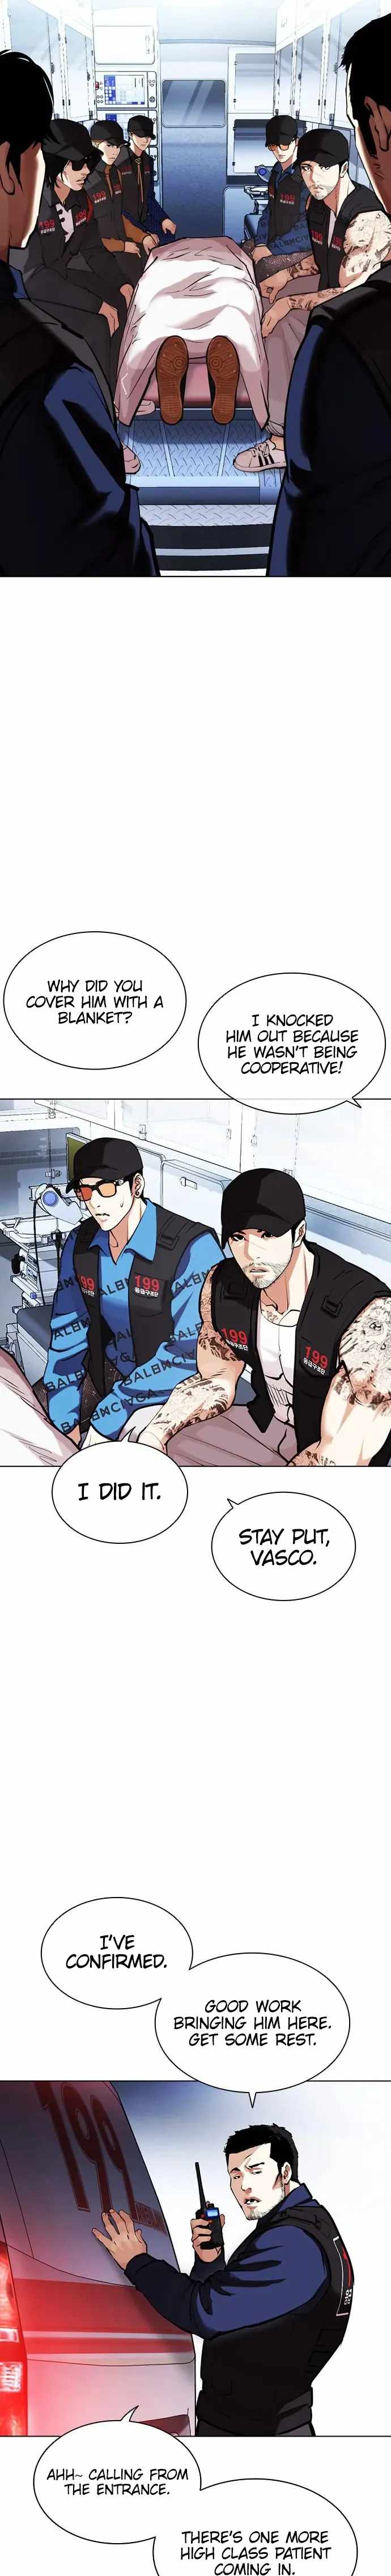 Lookism Chapter 450 image 35